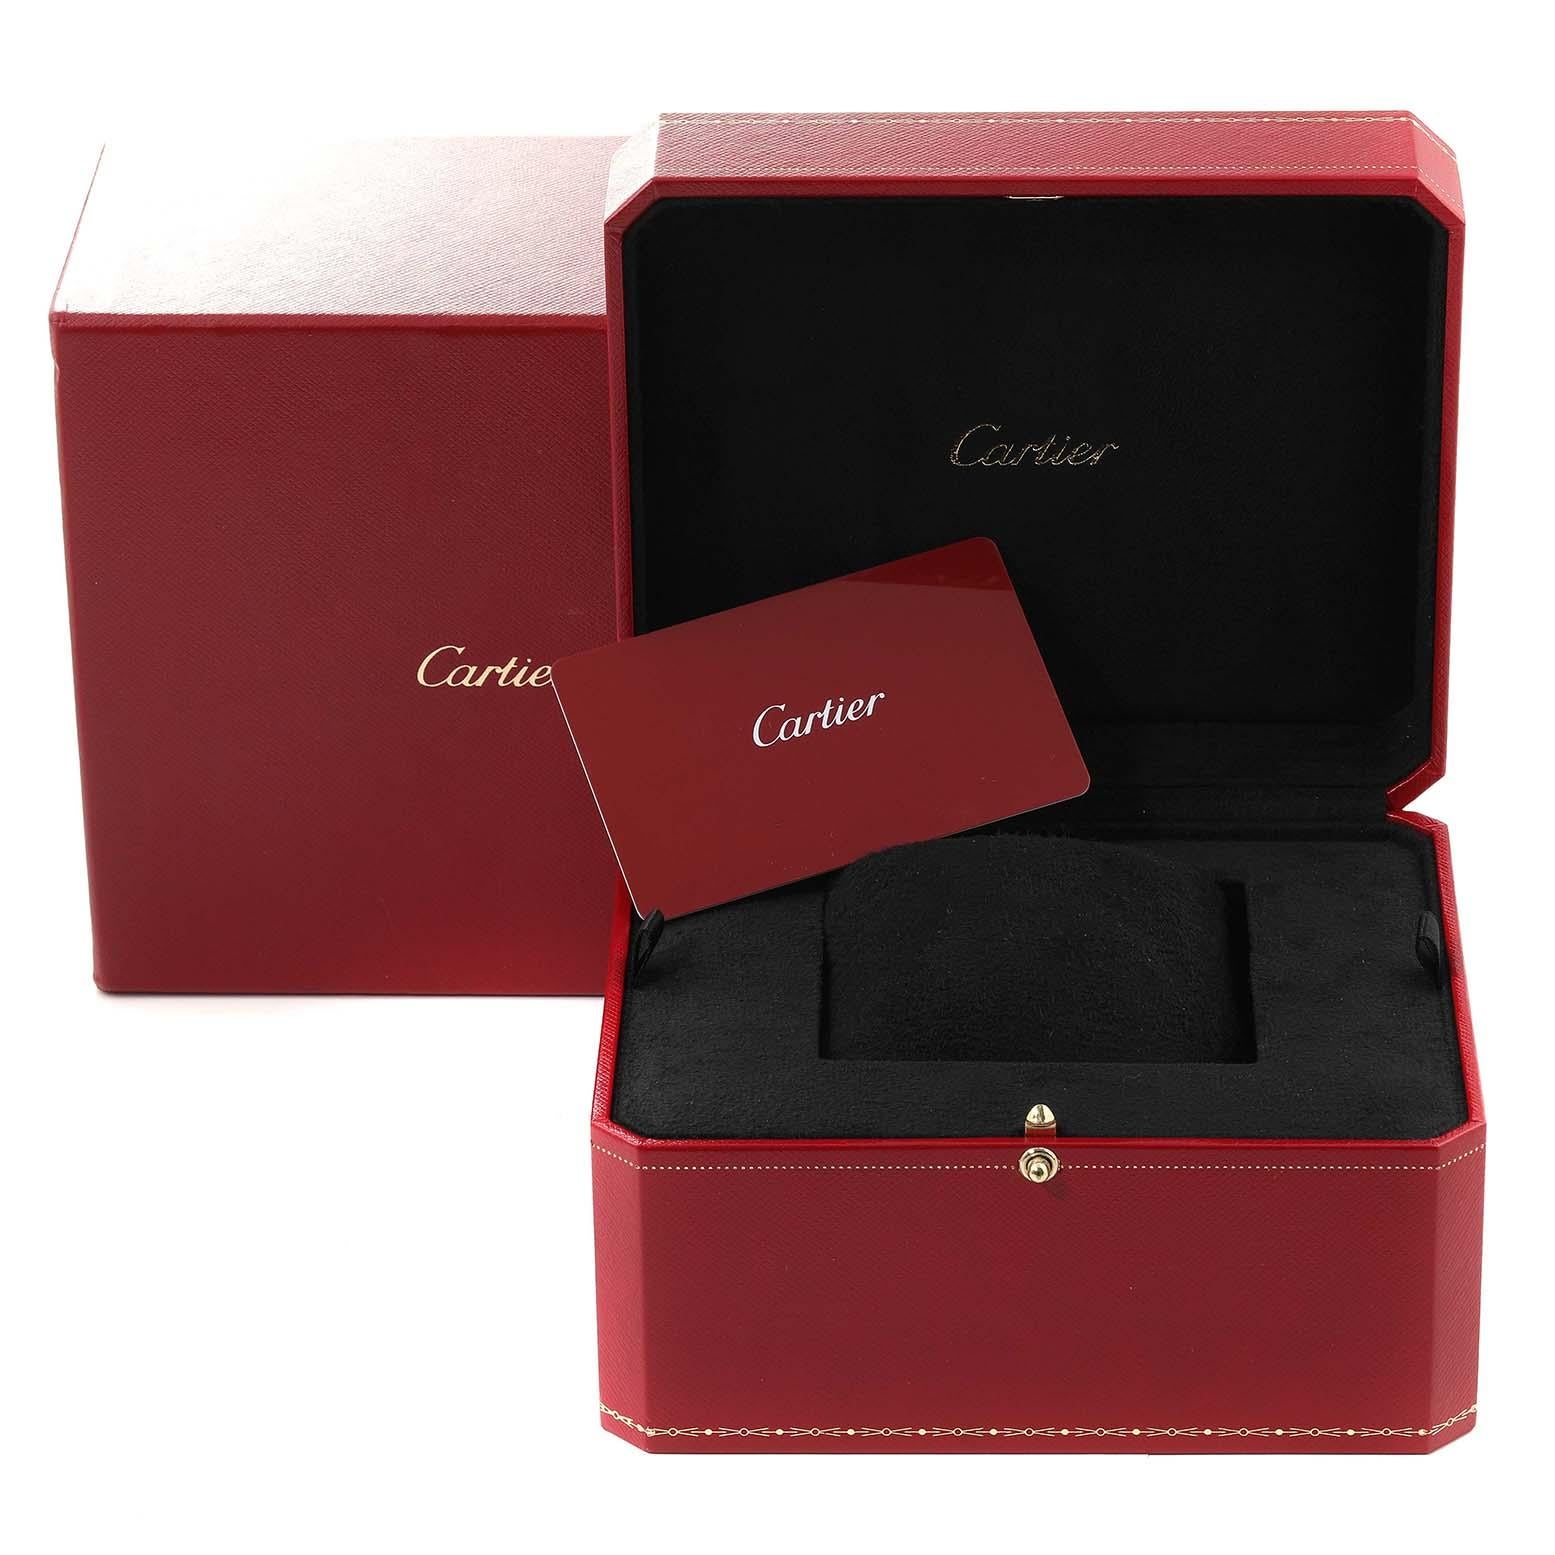 Cartier Tortue White Gold Diamond Ladies Watch WA501007 Box Card For Sale 3